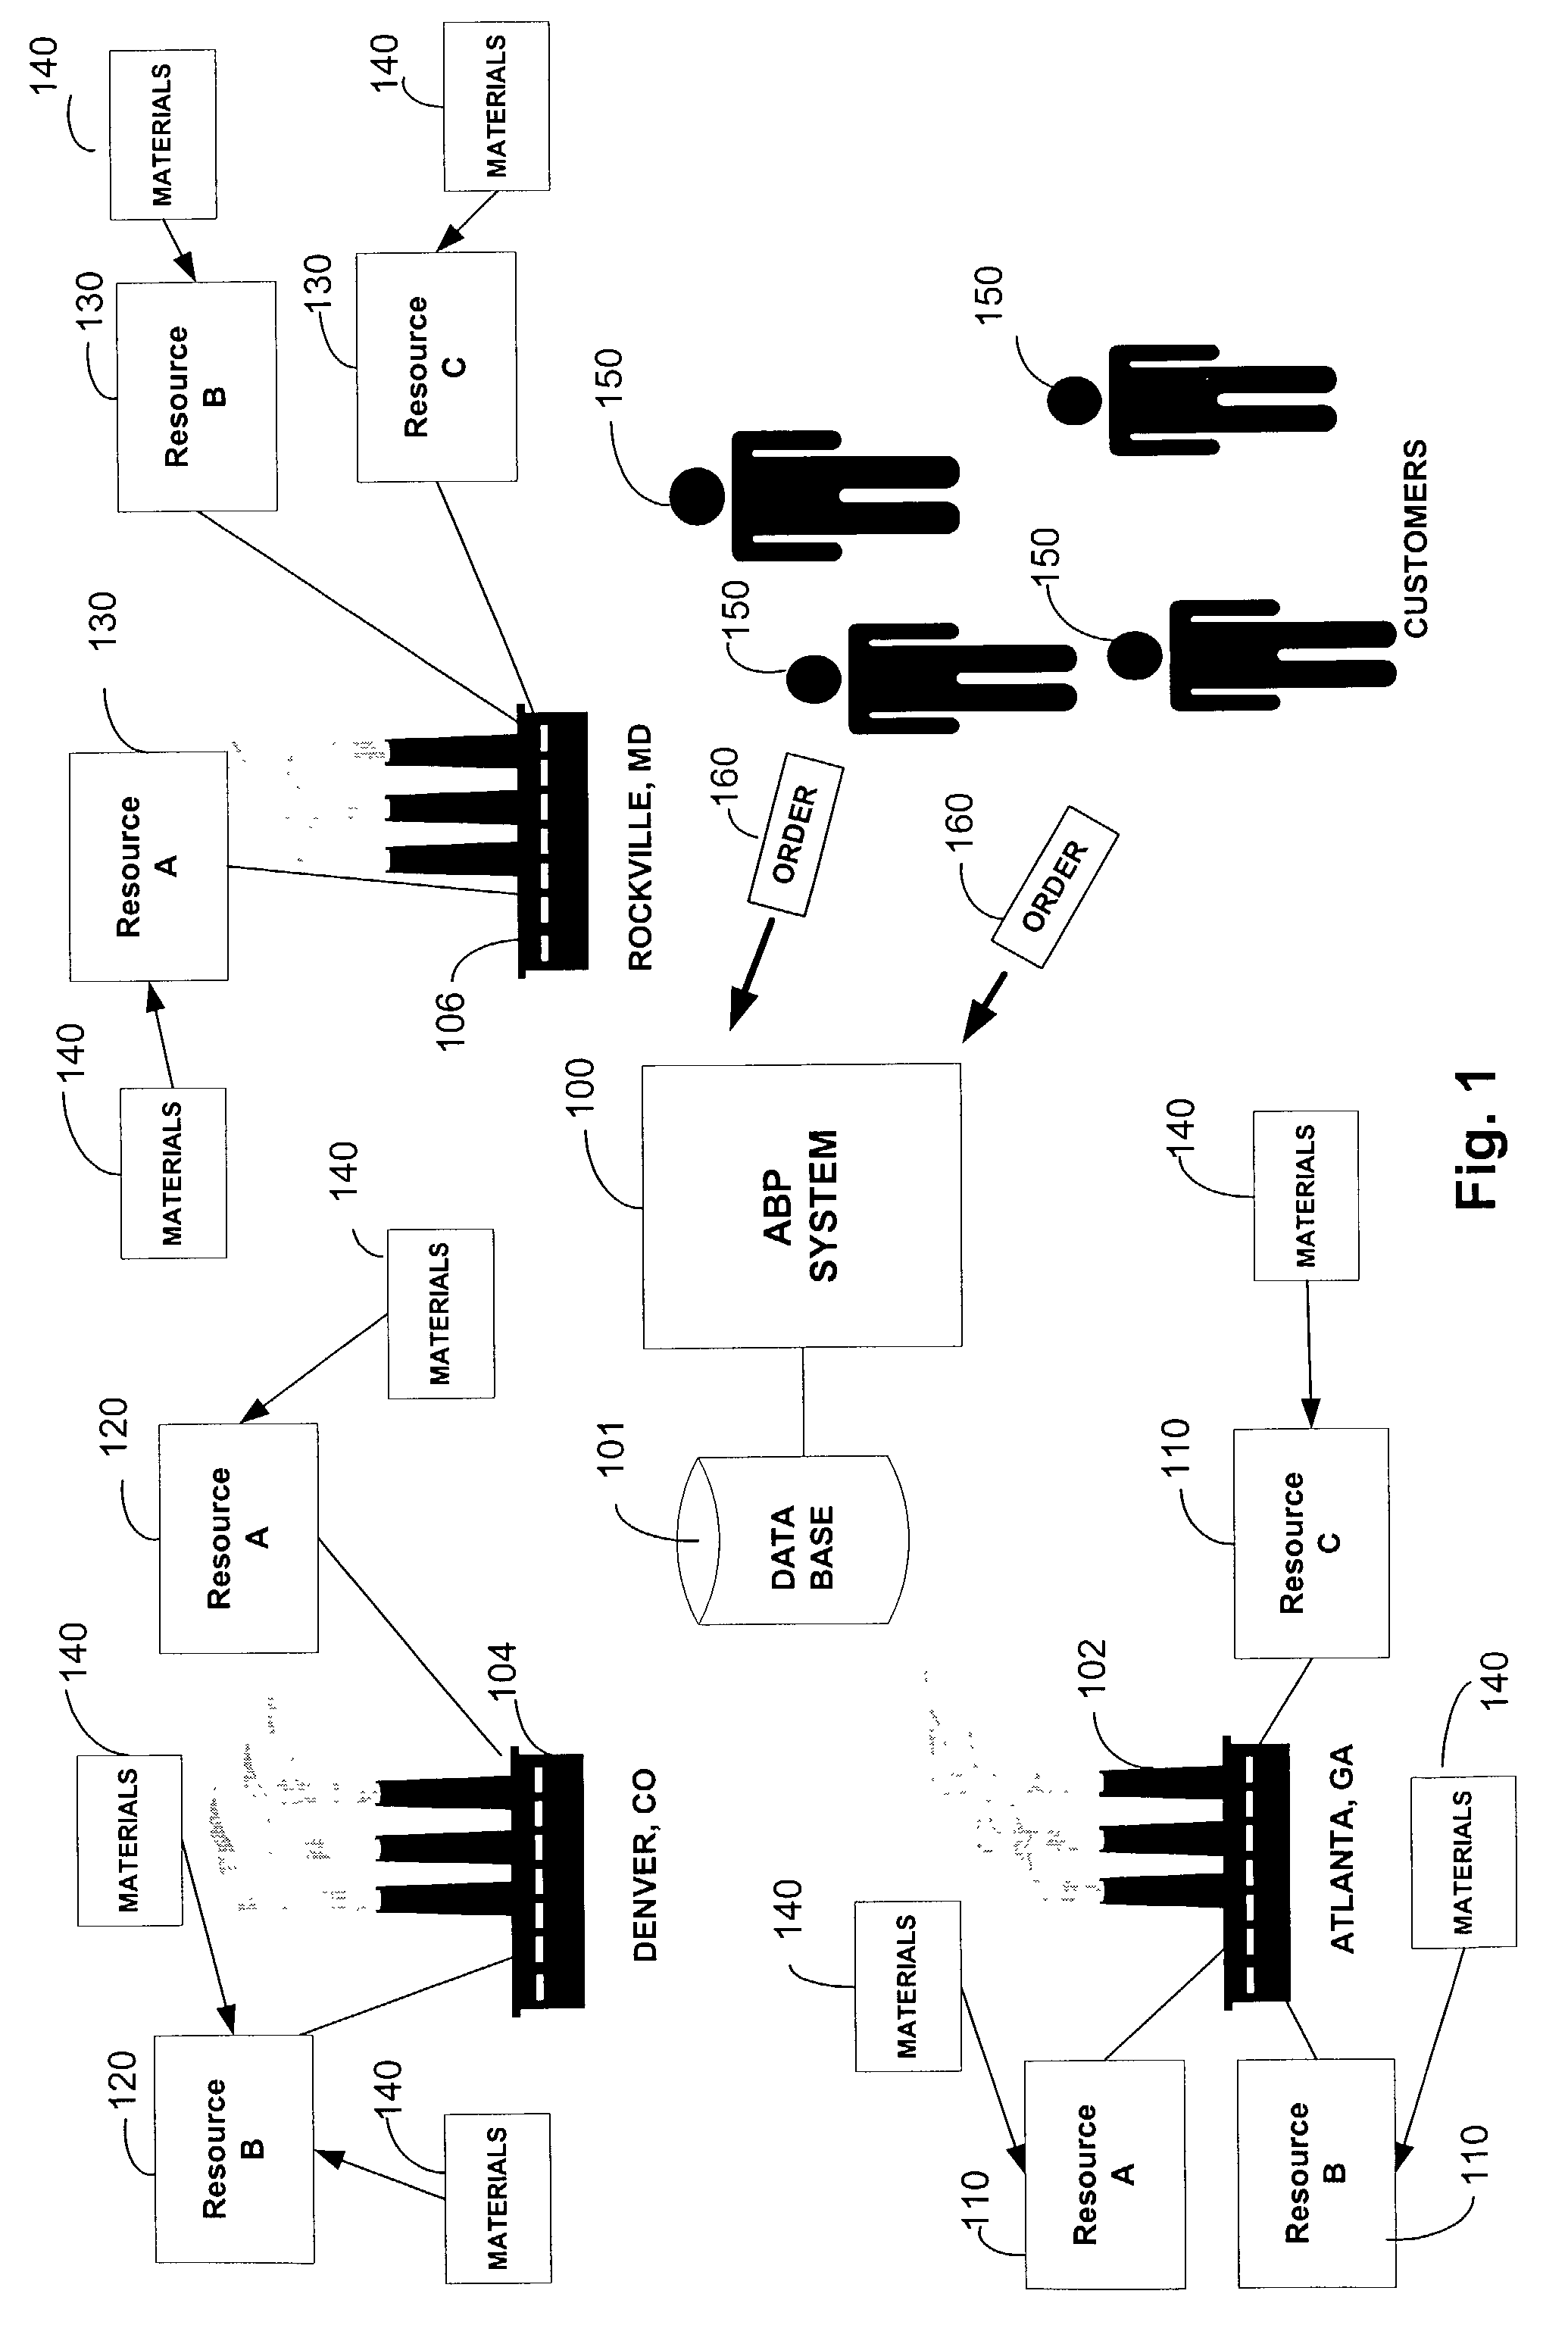 System, method, and computer program for replenishment by manufacture with attribute based planning